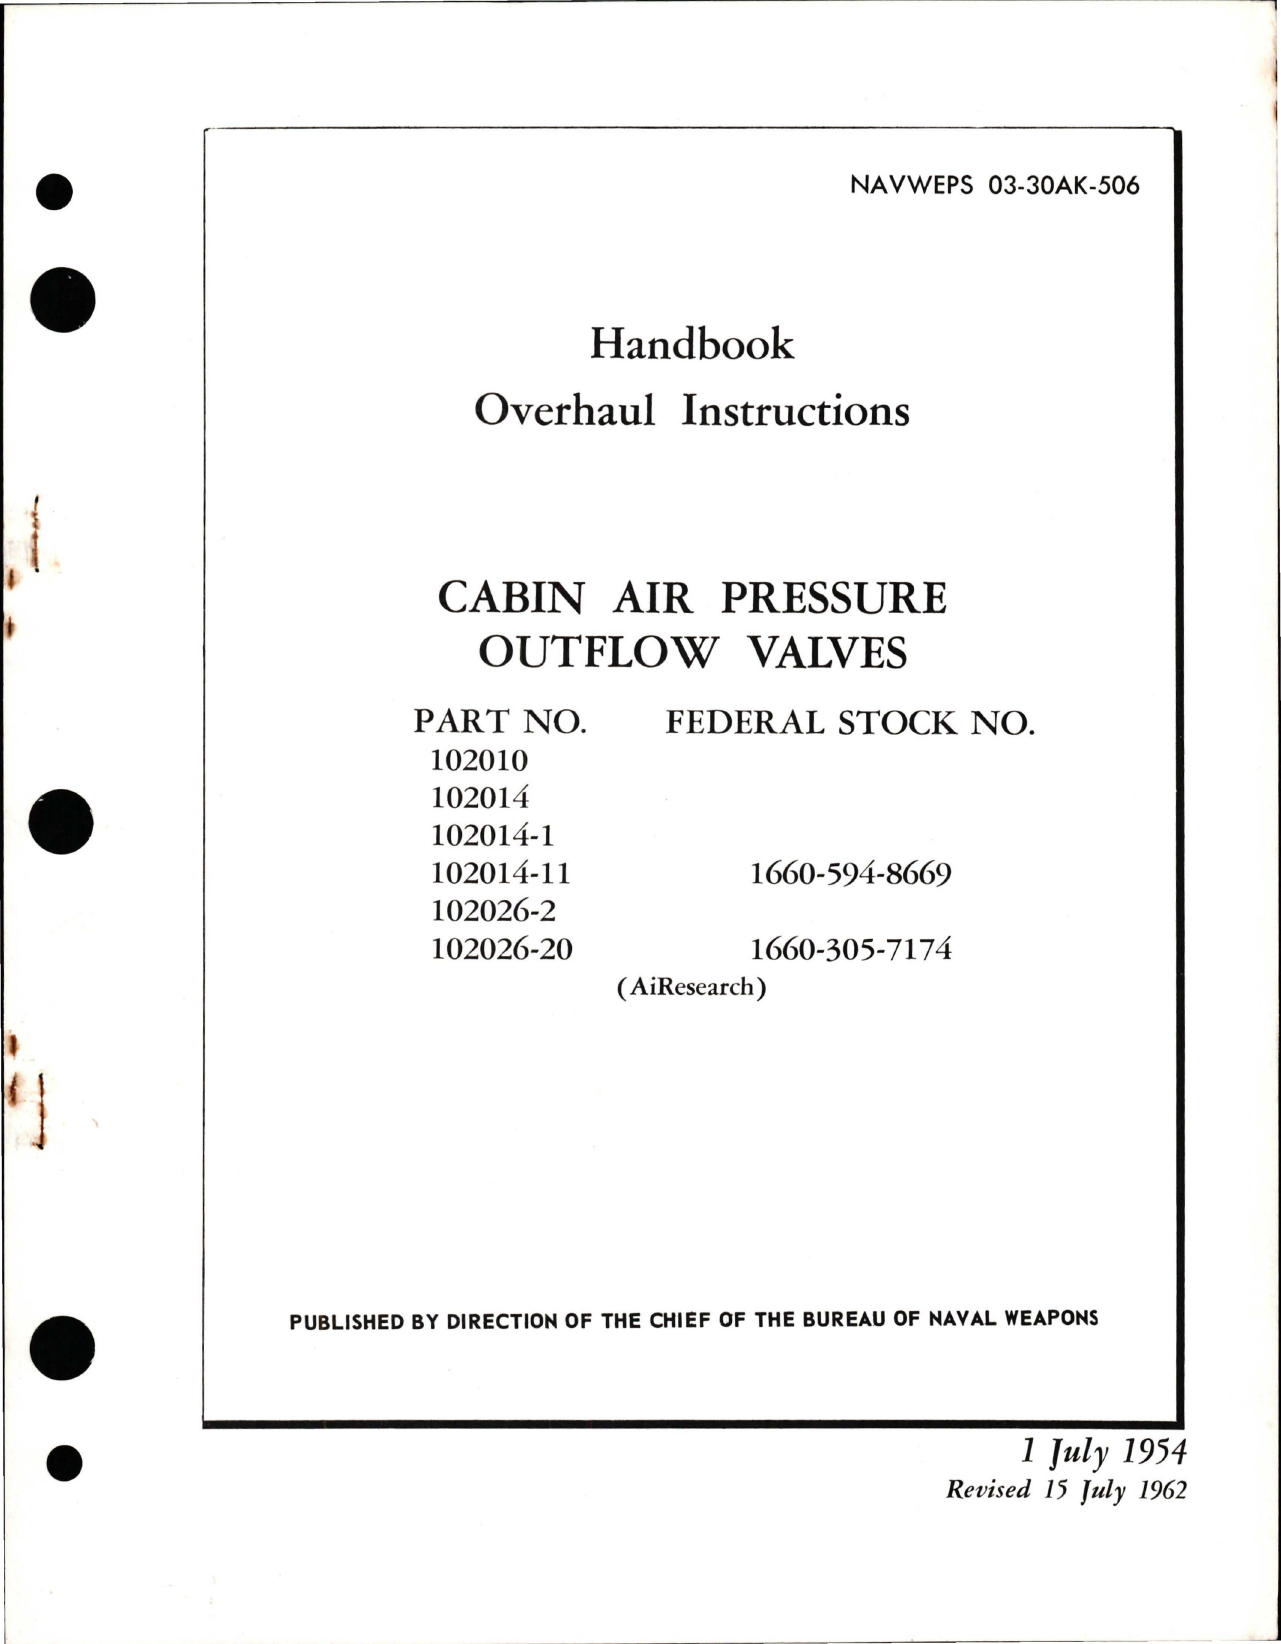 Sample page 1 from AirCorps Library document: Overhaul Instructions for Cabin Air Pressure Outflow Valves